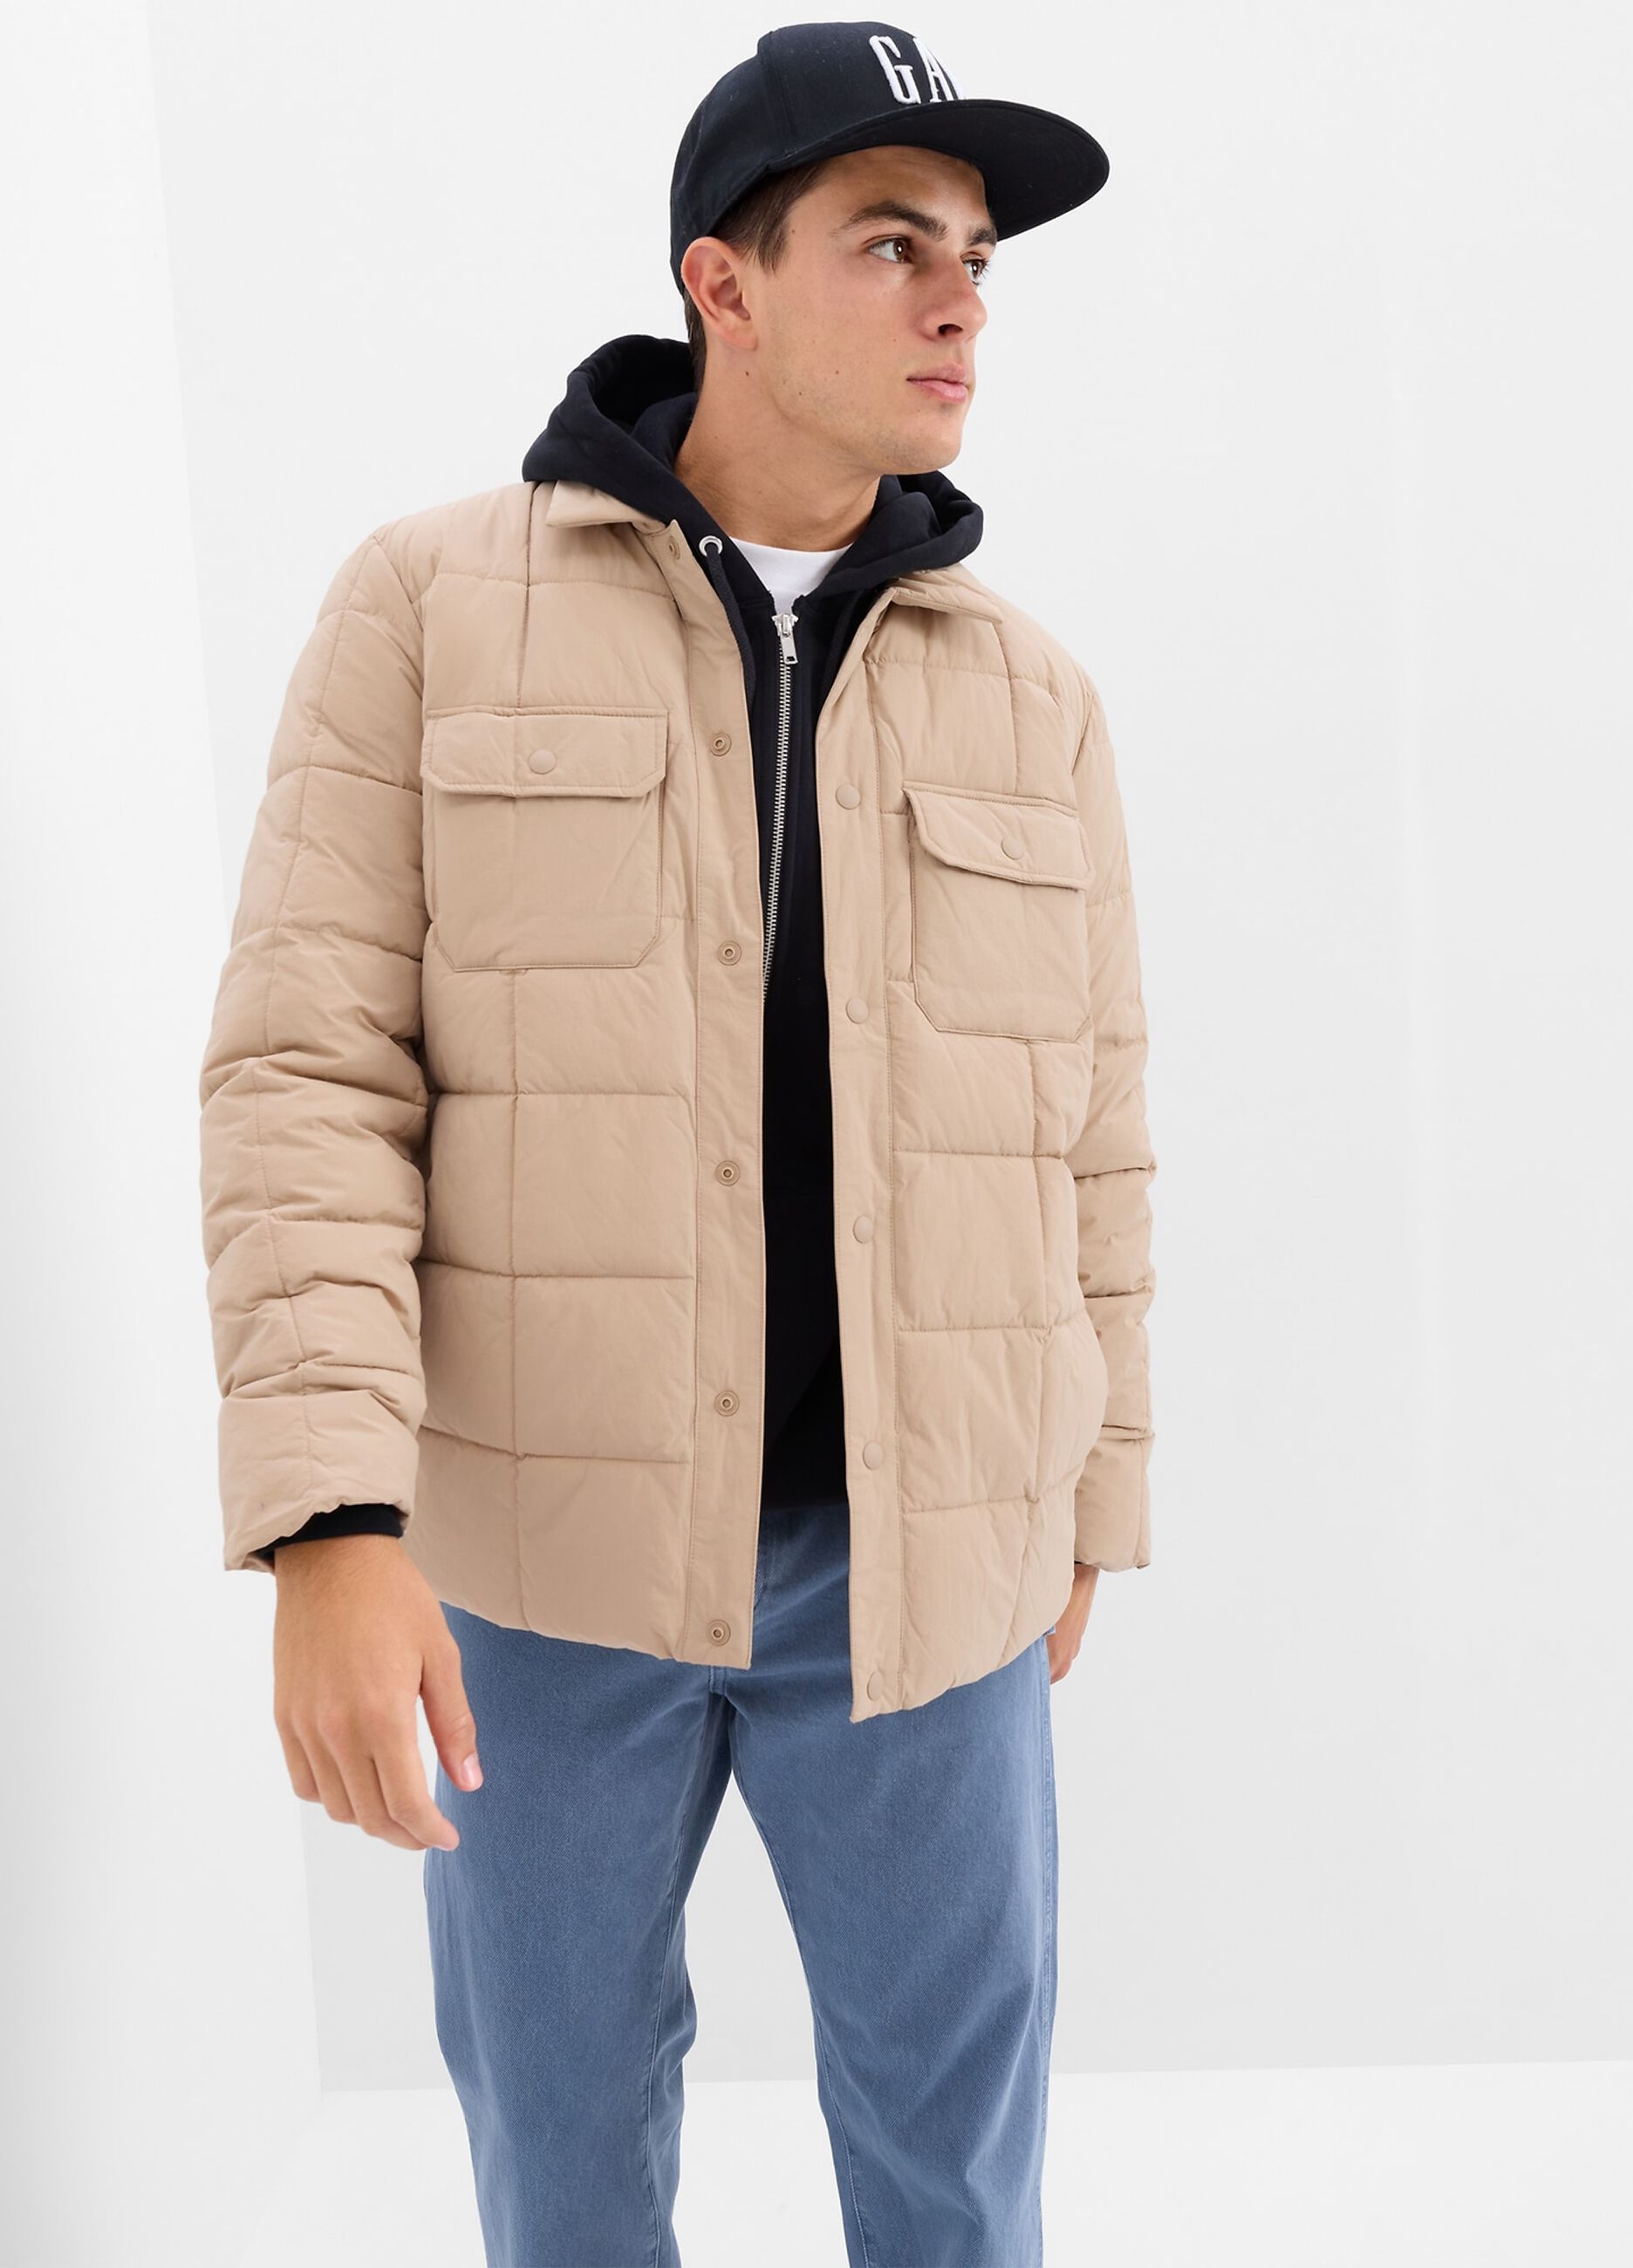 Quilted jacket with pockets.